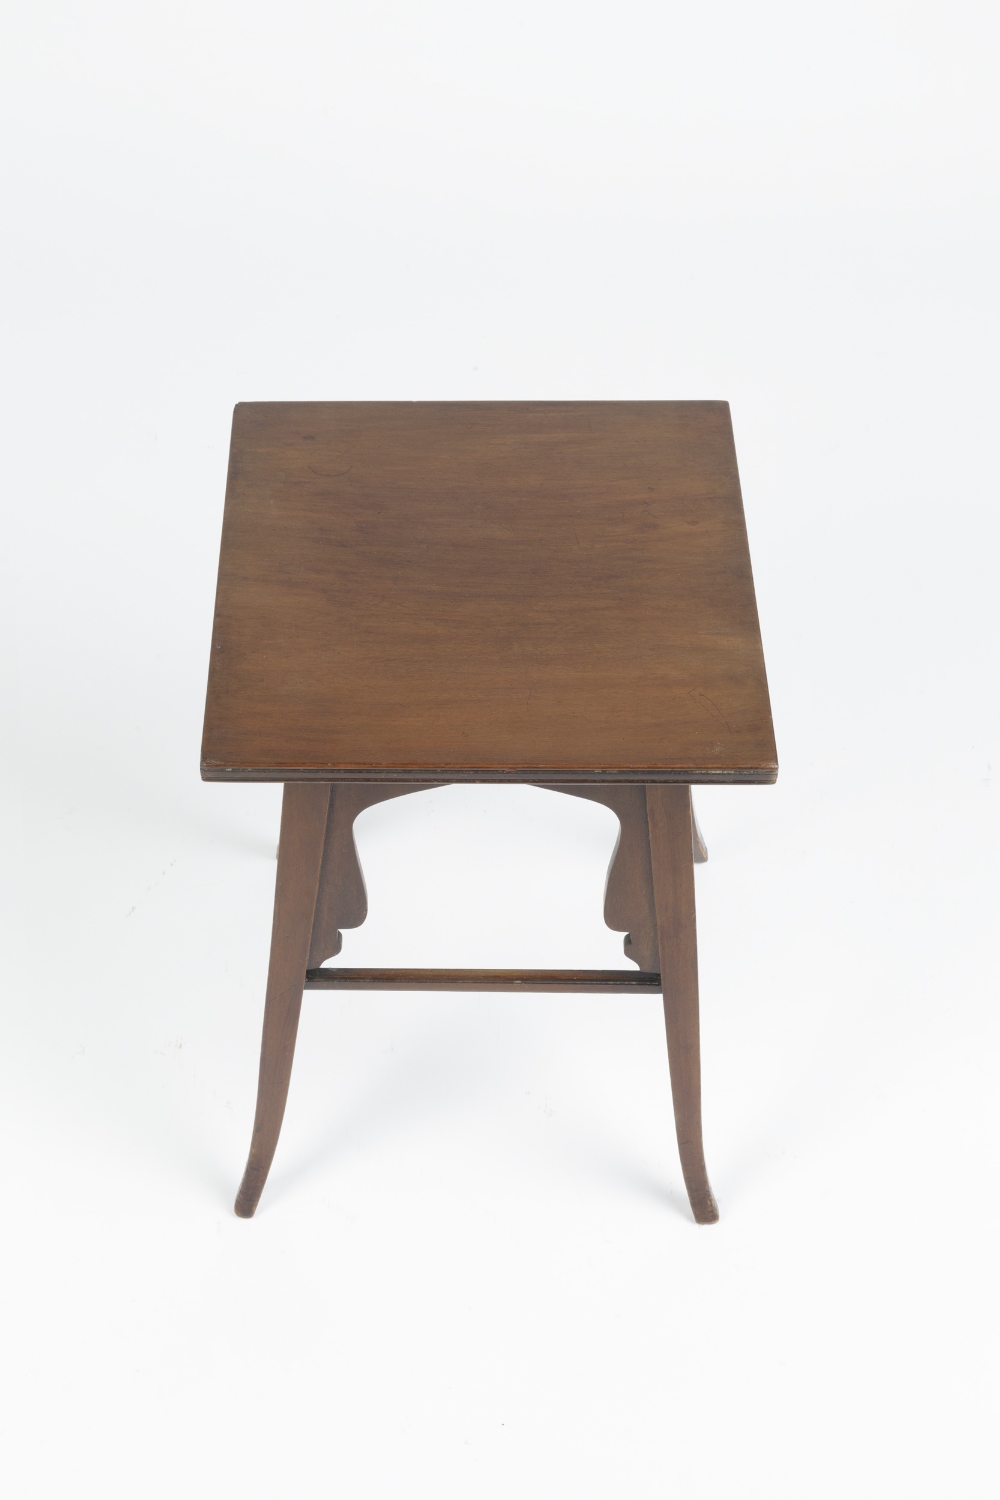 After Edward William Godwin (1833 - 1886) jardiniere stand or small table, mahogany 37cm x 48cm - Image 3 of 4